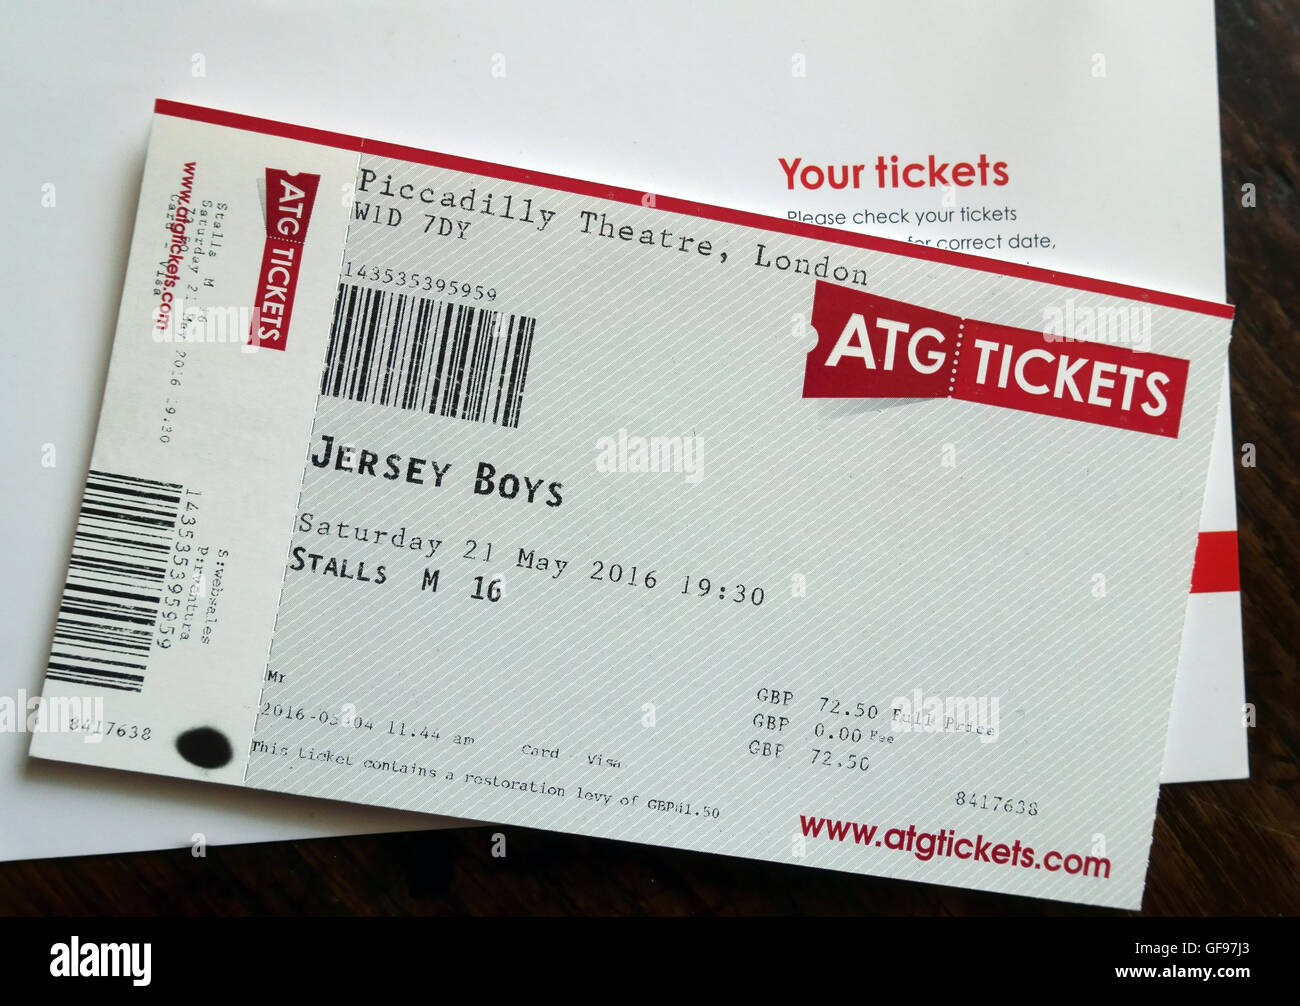 best price for jersey boys tickets